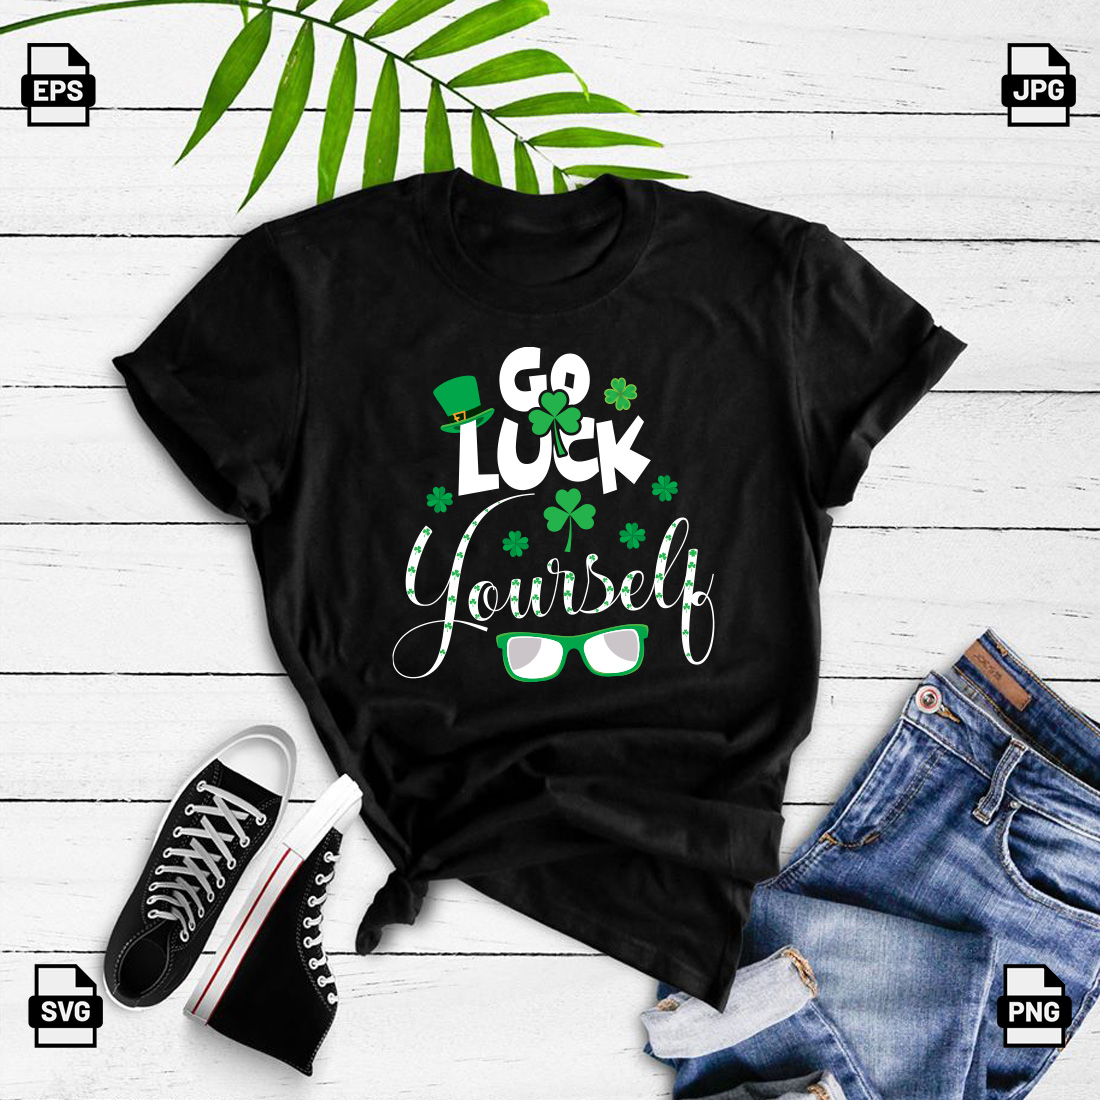 Go luck yourself, St Patrick\\\'s day t-shirt design cover image.